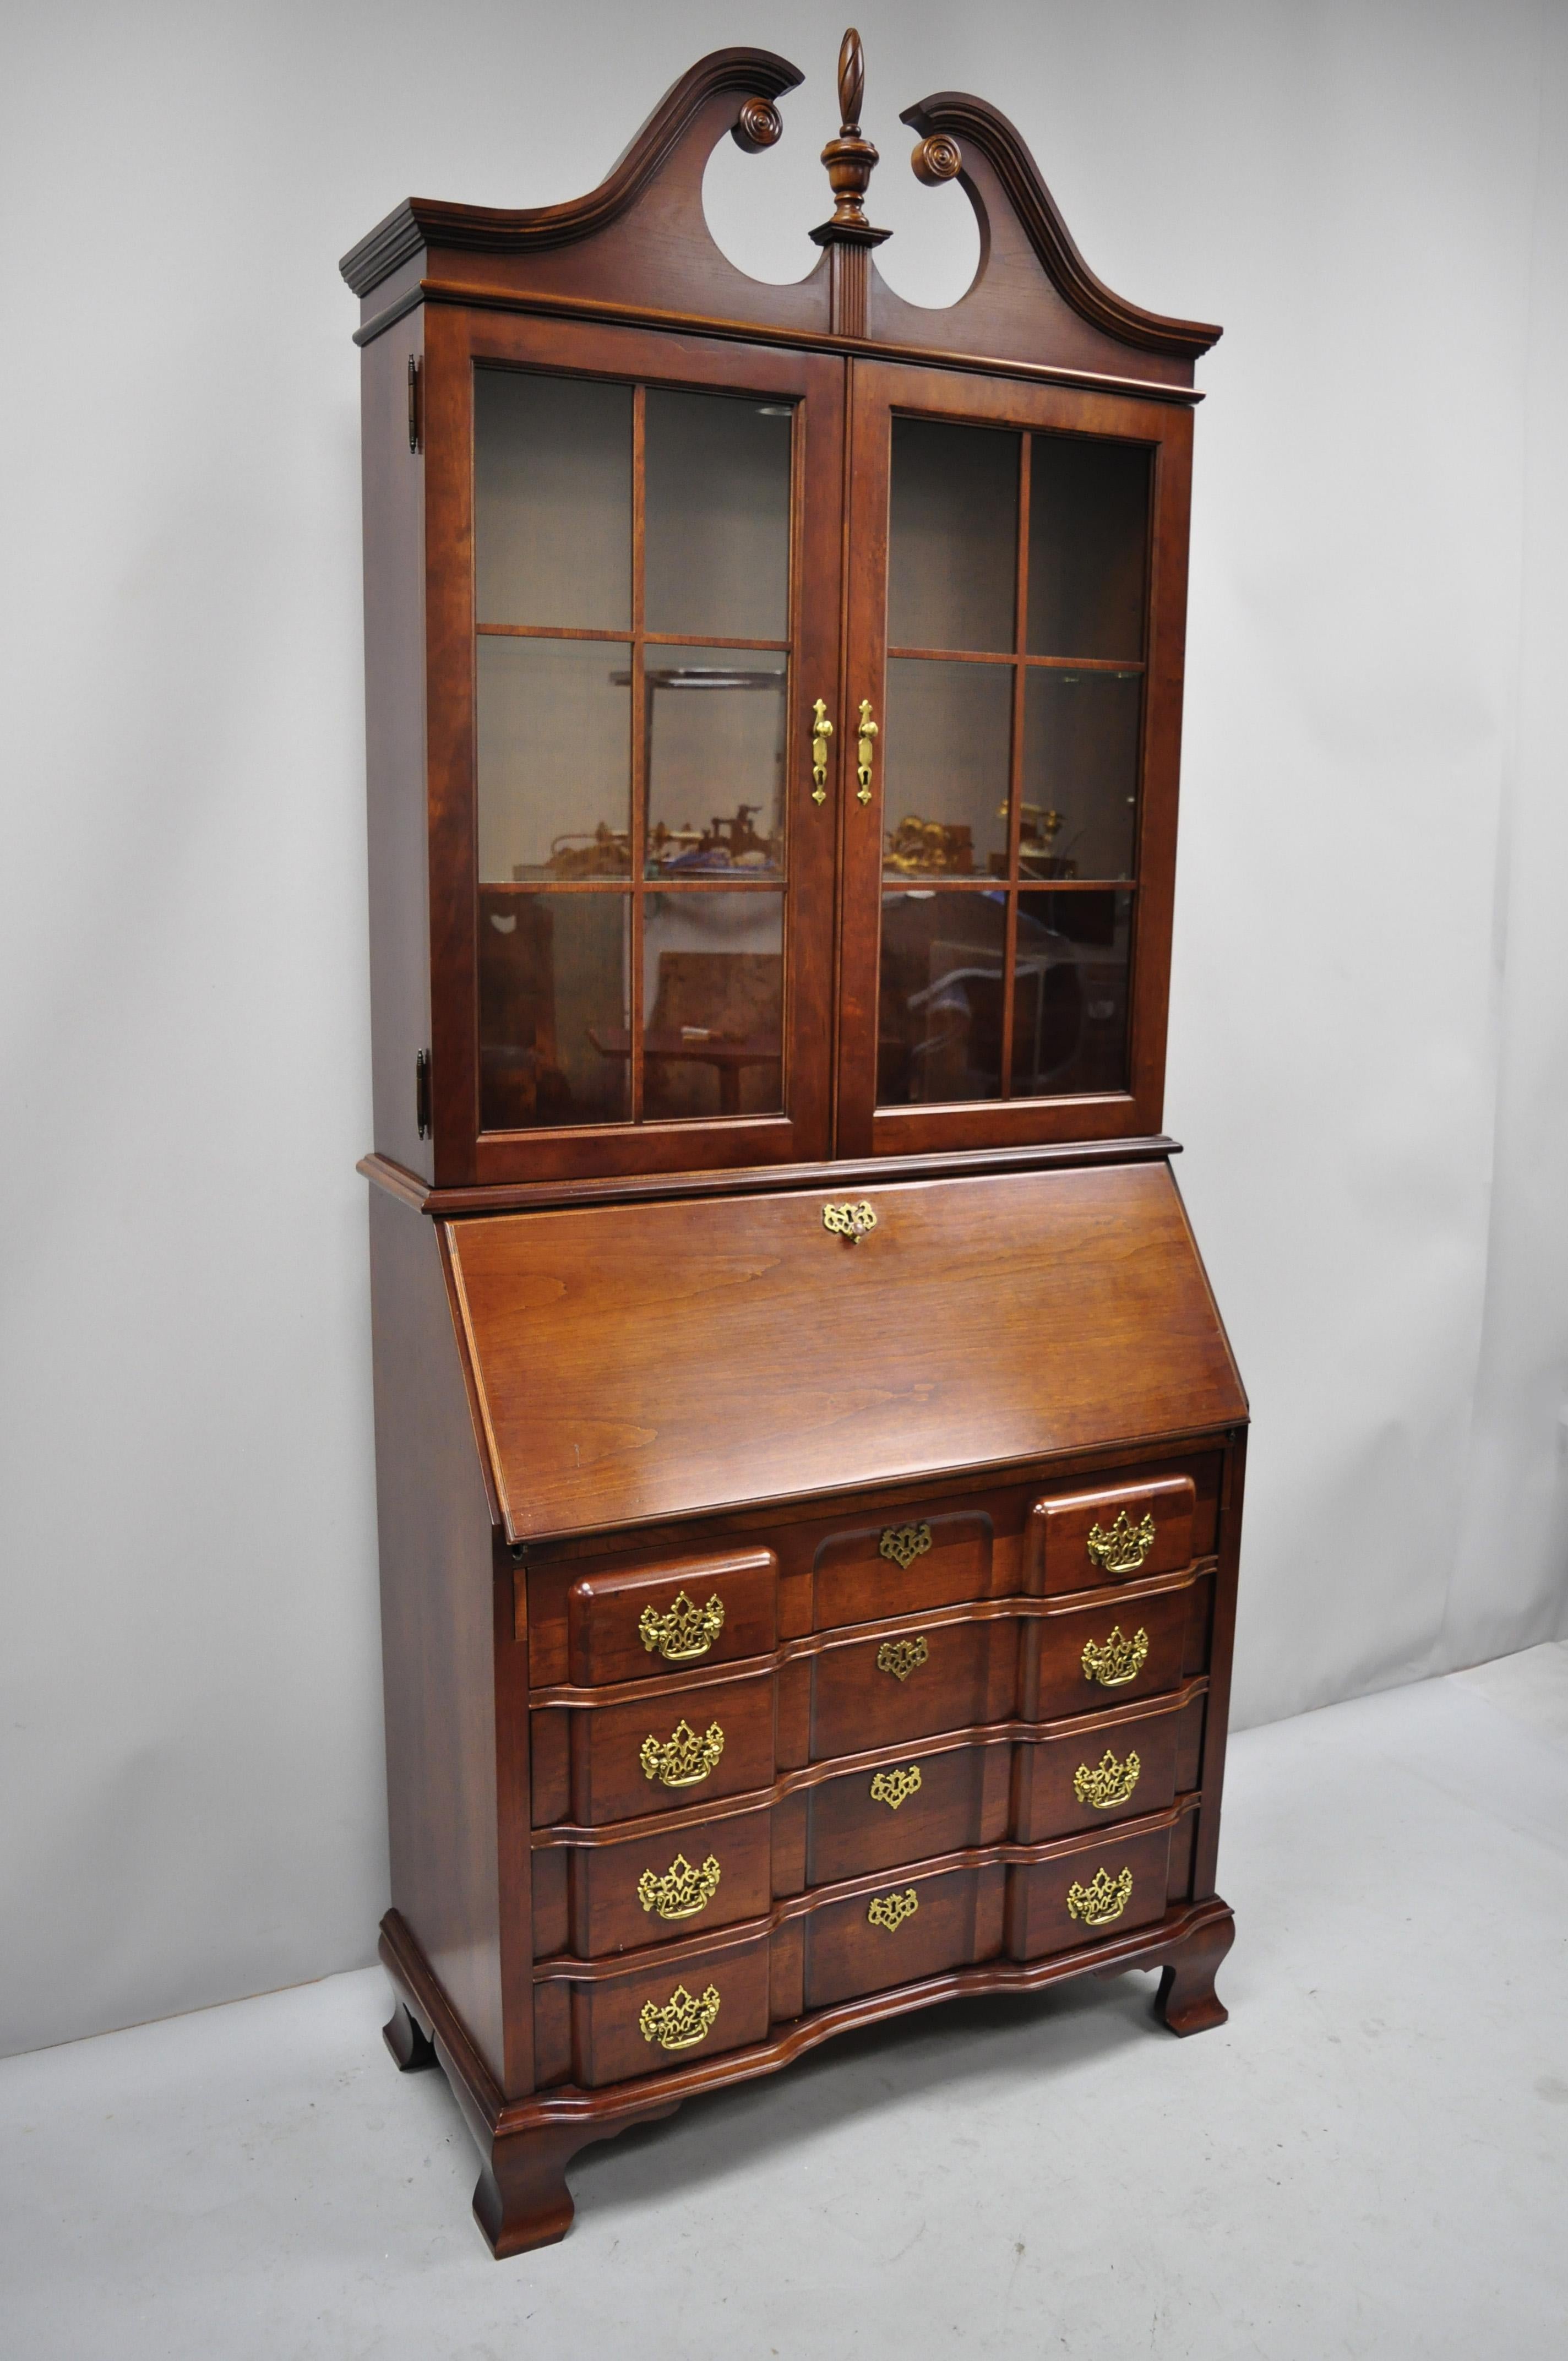 Vintage cherry Chippendale style block slant front secretary desk by Jasper Cabinet Co. Item features fitted interior, block front, solid wood construction, beautiful wood grain, lighted interior, original label, working lock and key, plate groves,